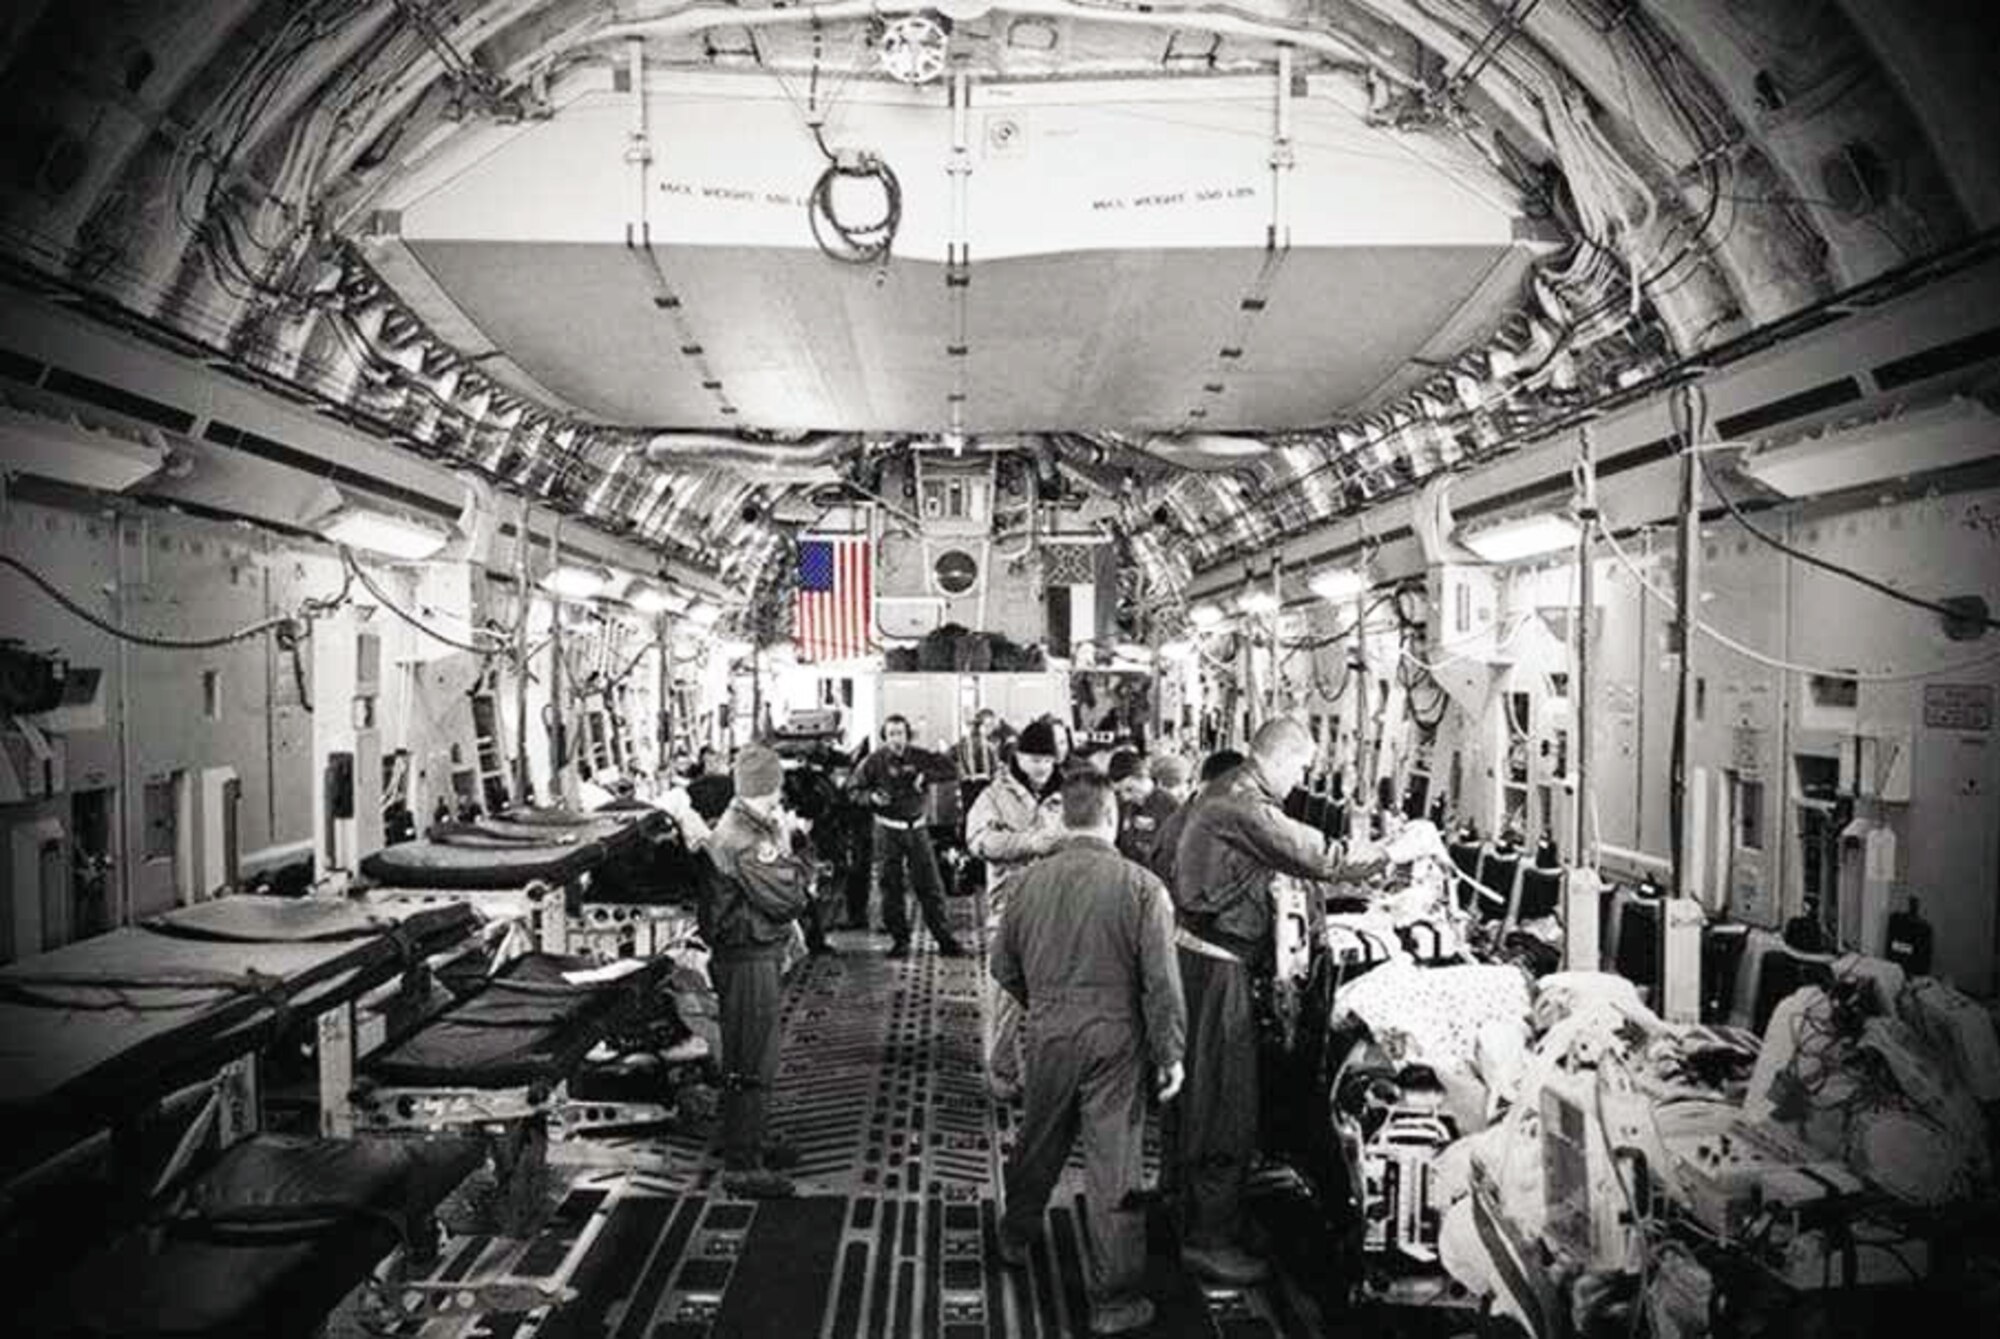 Aeromedical personnel tend to wounded warriors while onboard a C-17 Globemaster
III. Missions transport the injured from areas of responsibility to Ramstein AB, Germany, the regional contingency aeromedical staging facility. There, wounded will be assessed for continued care, in which they will be transferred to Lundstul Army Hospital if unstable, or released to travel stateside for continued recovery. (U.S. Air Force courtesy photo)